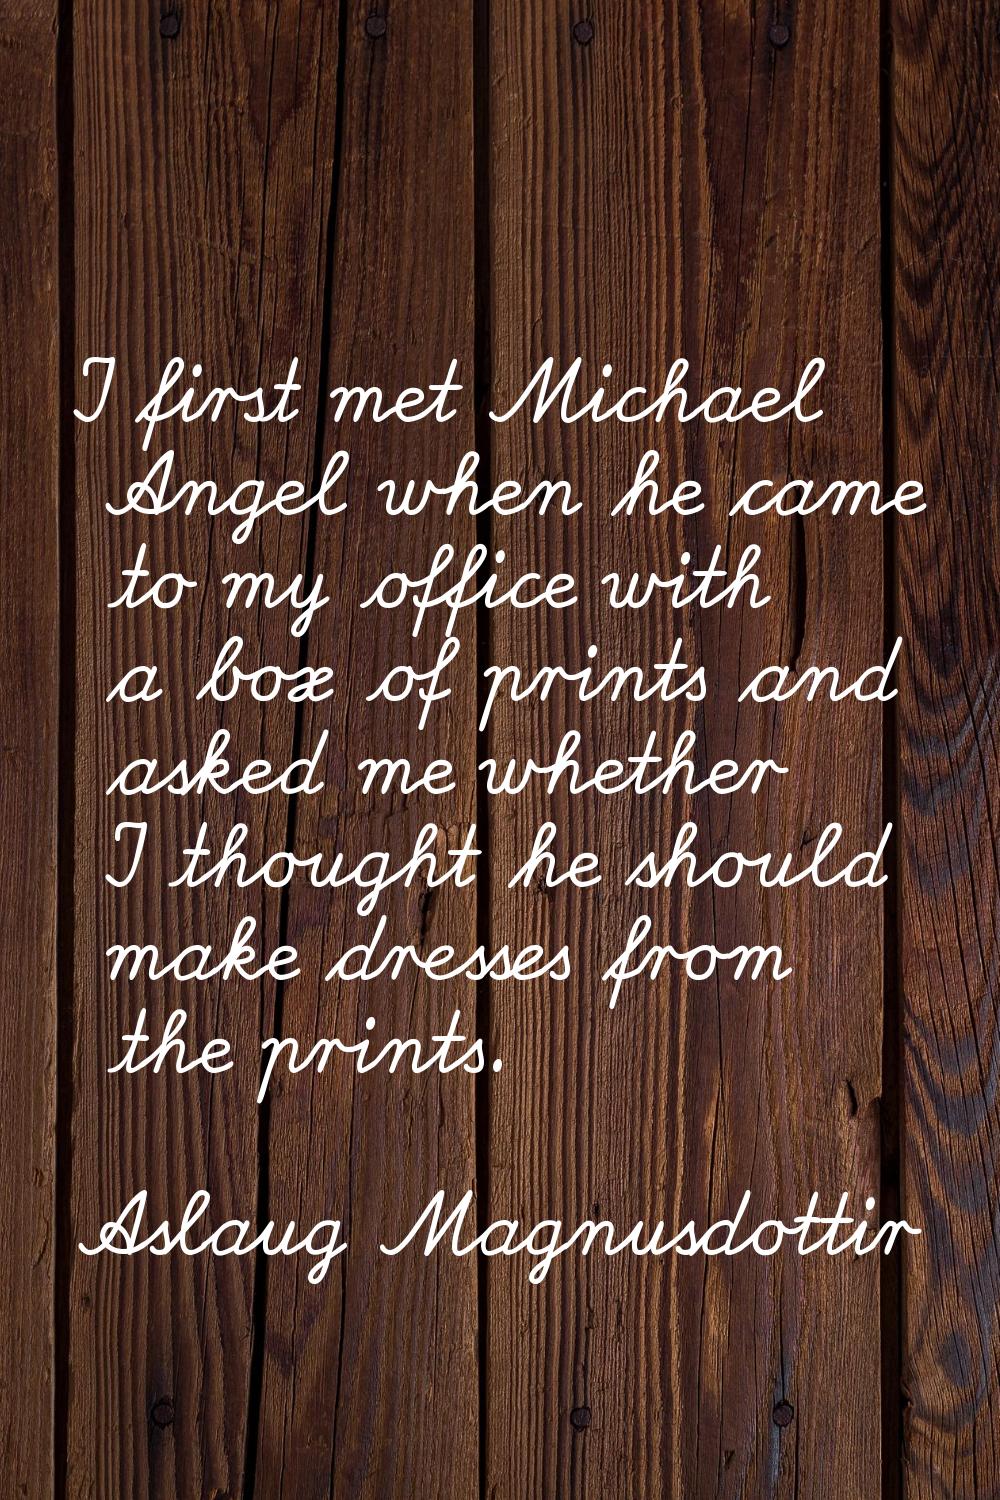 I first met Michael Angel when he came to my office with a box of prints and asked me whether I tho